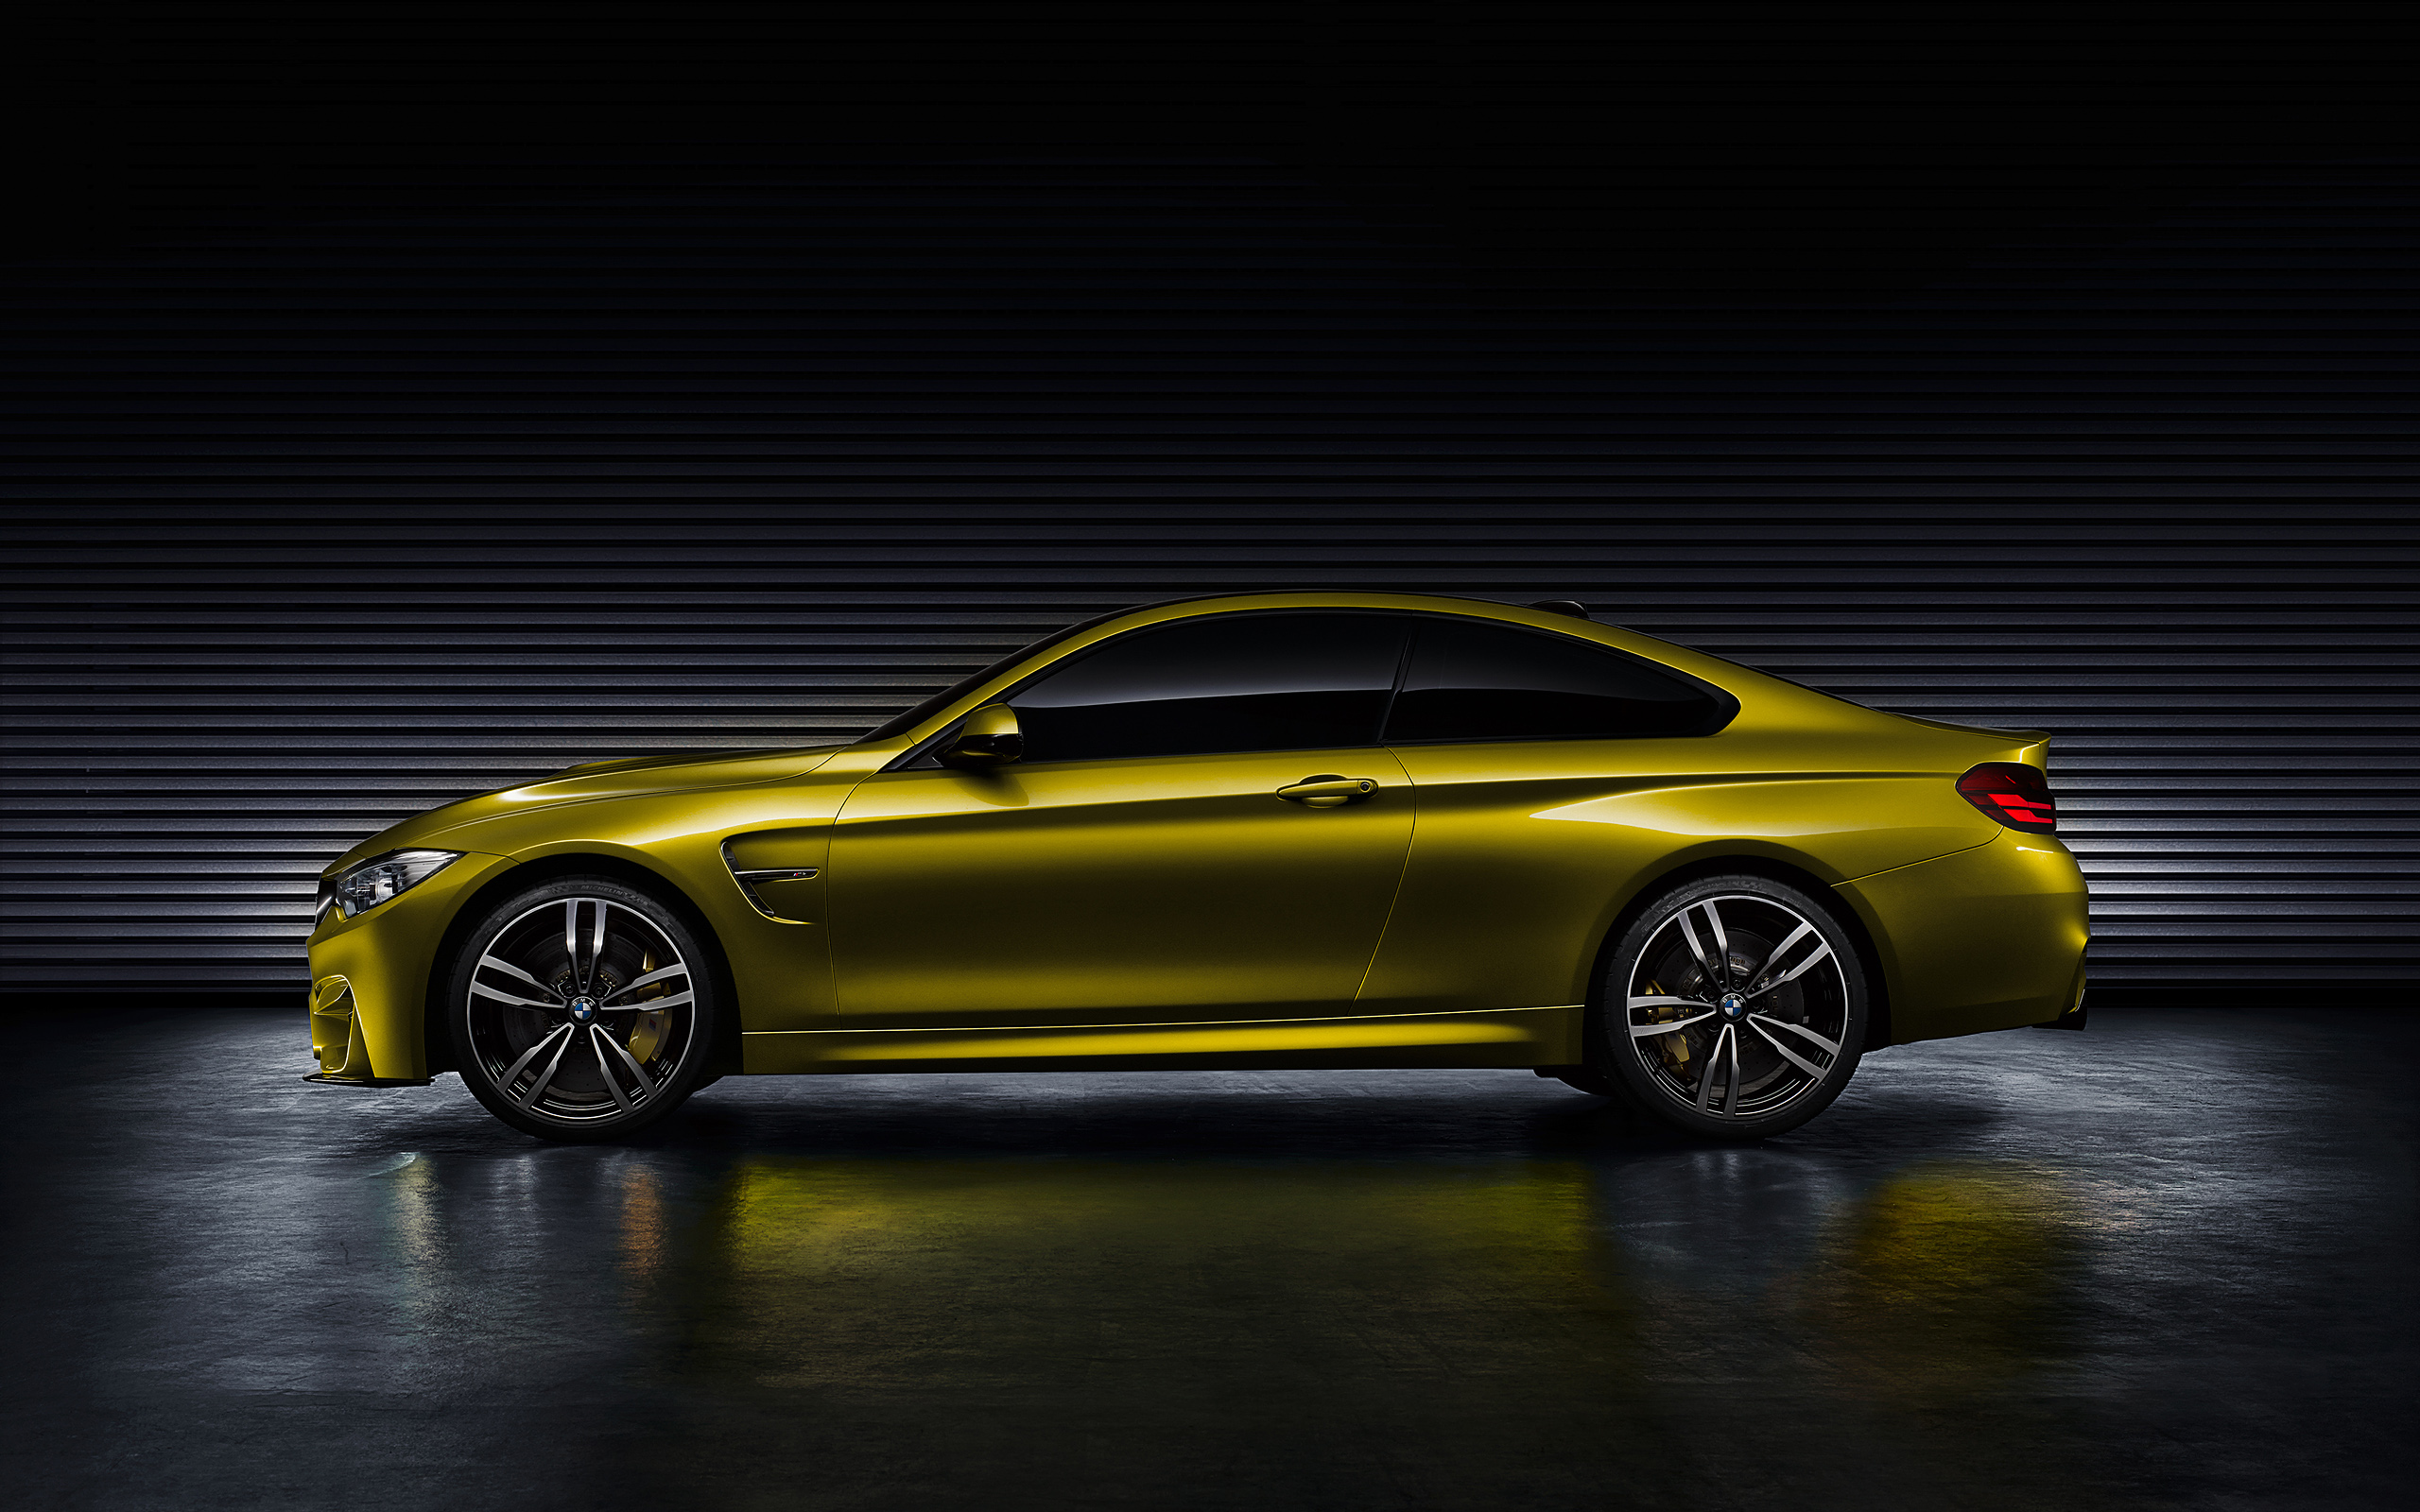 vehicles, bmw m4 coupe, bmw